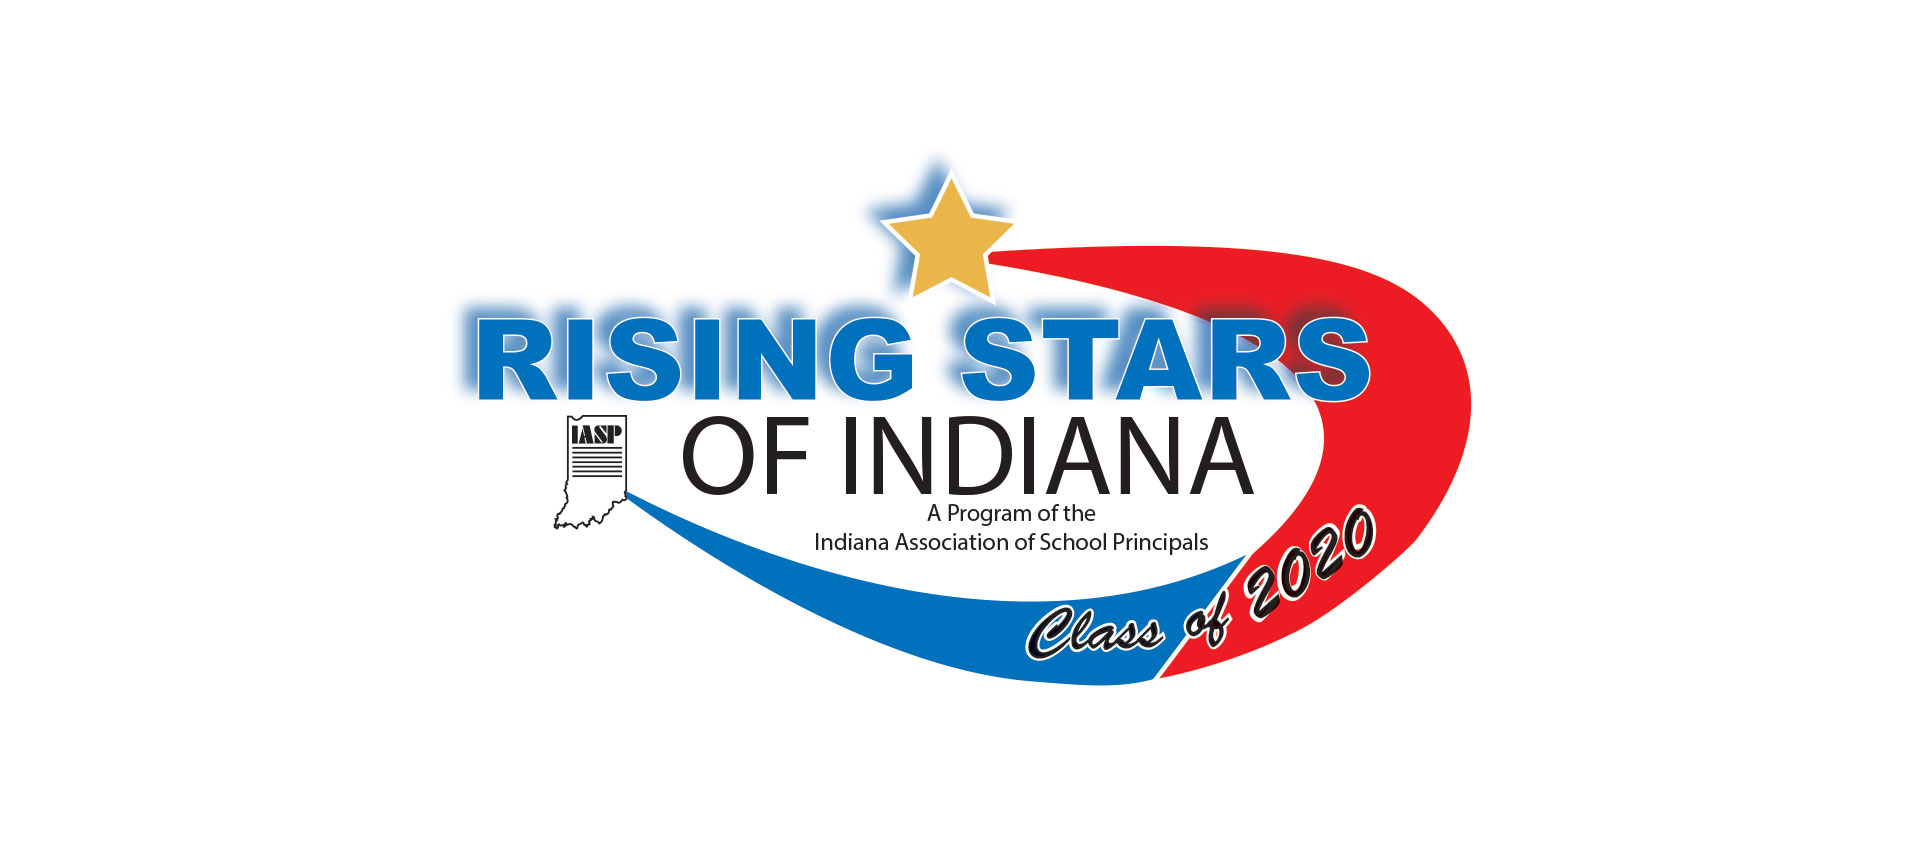 Rising Stars of Indiana Class of 2020 Indiana